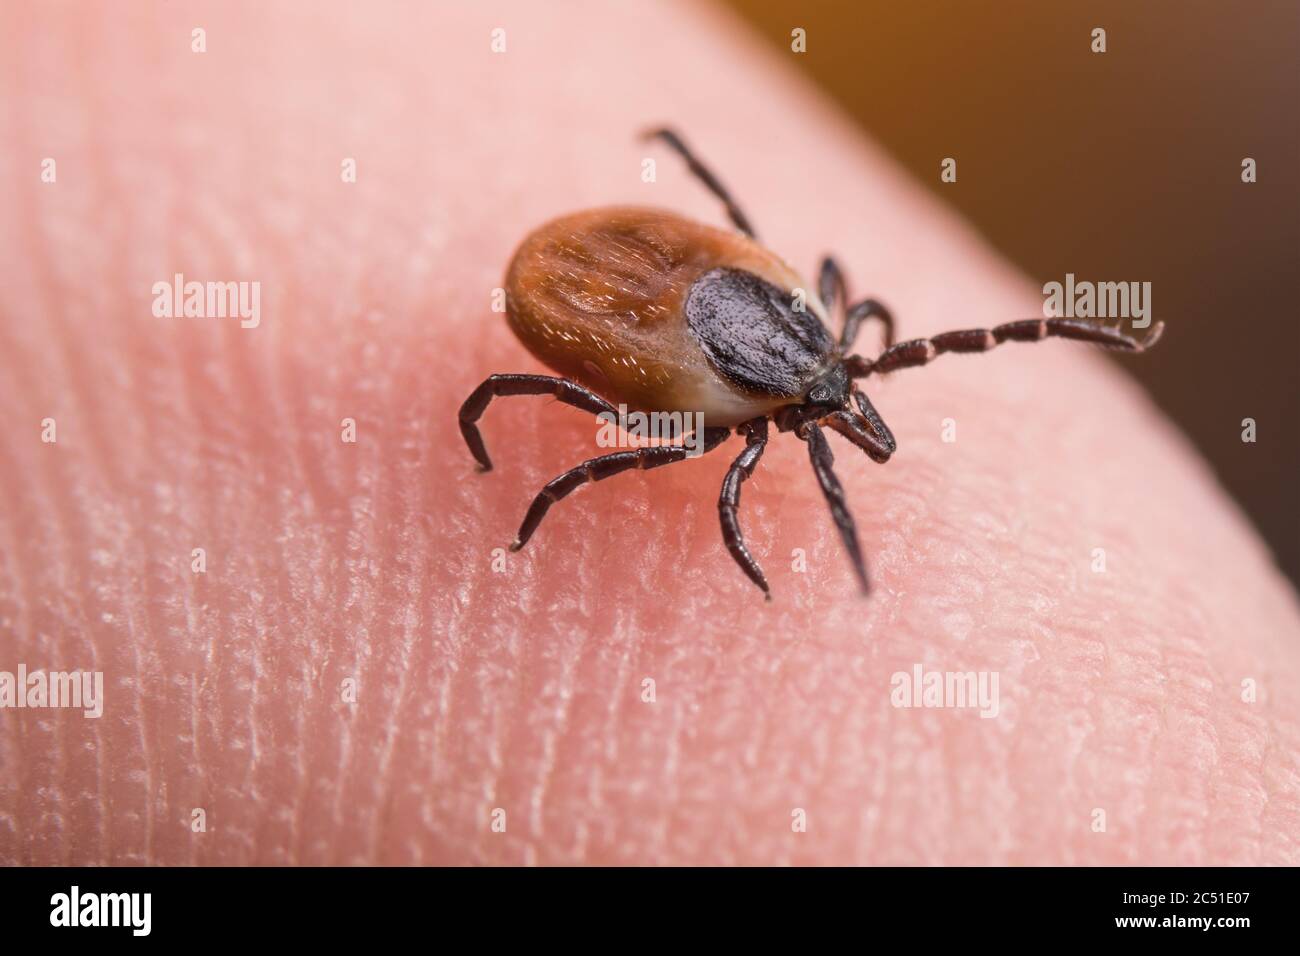 Female deer tick on skin of human finger. Ixodes ricinus or scapularis. Close-up of parasitic mite in dynamic motion on fingertip Stock Photo